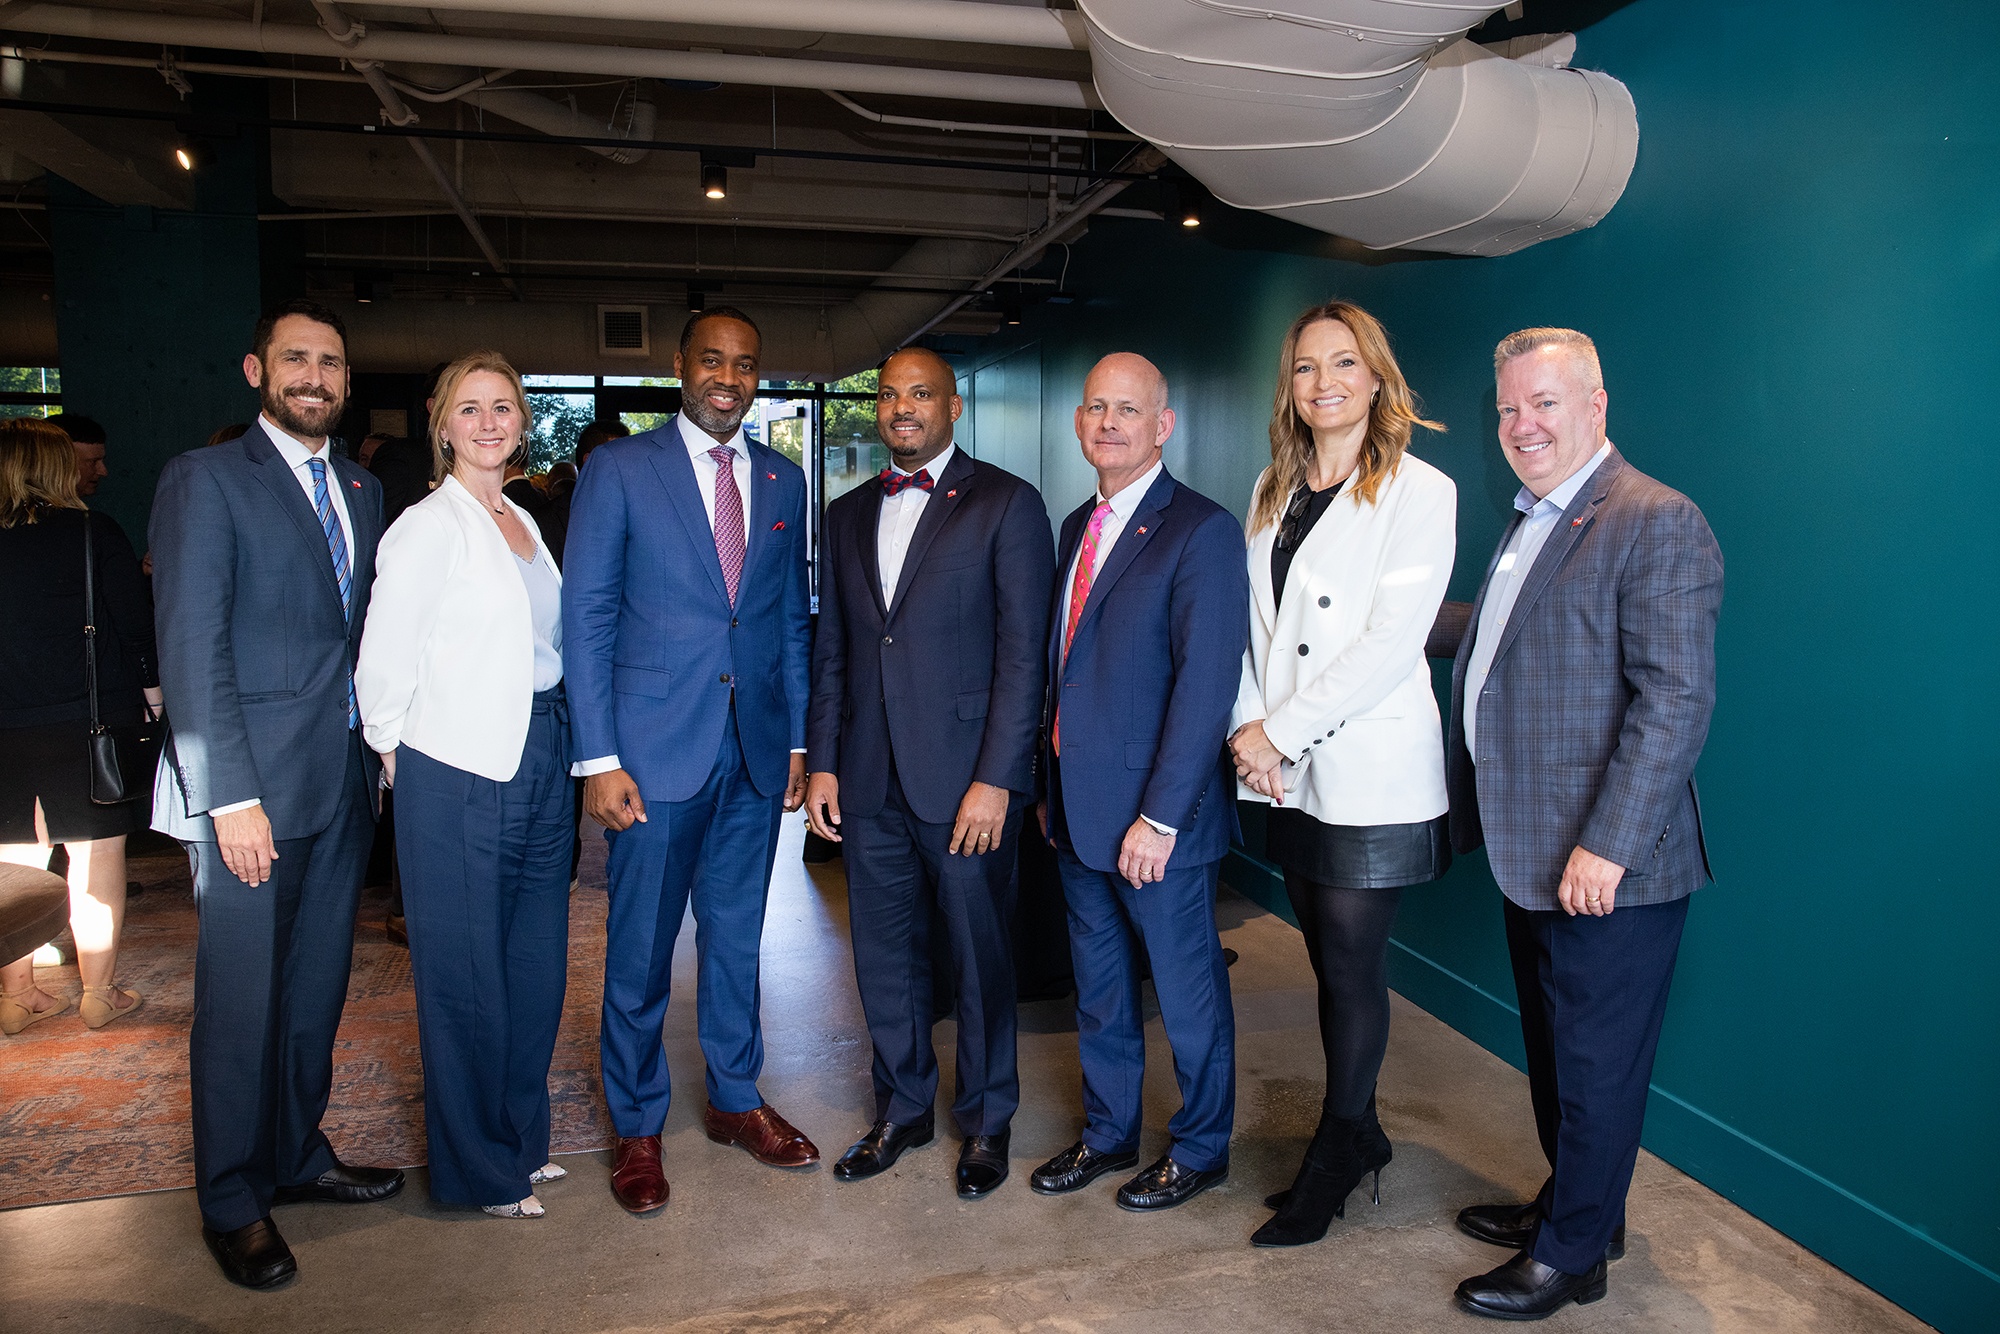 Bermuda Concludes Another Successful Business Development Mission to RIMS’ RISKWORLD